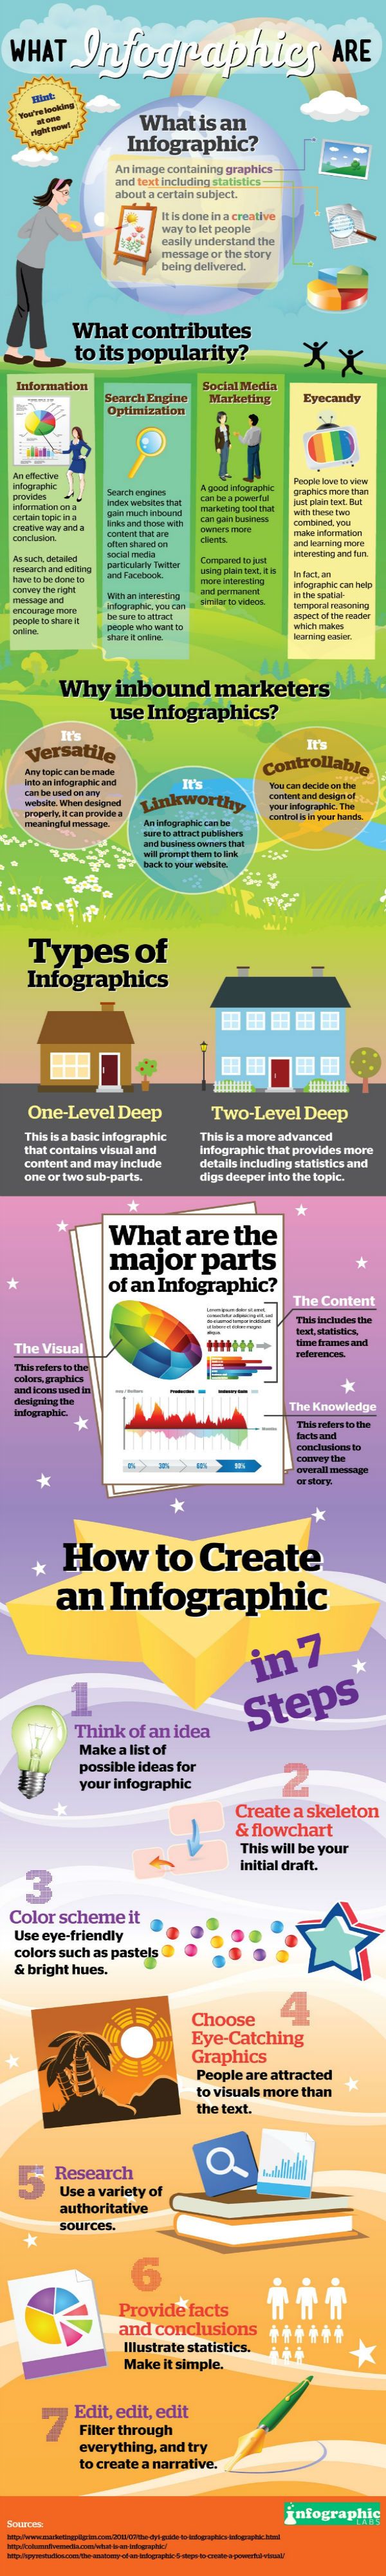 How to Create an Awesome Infographic